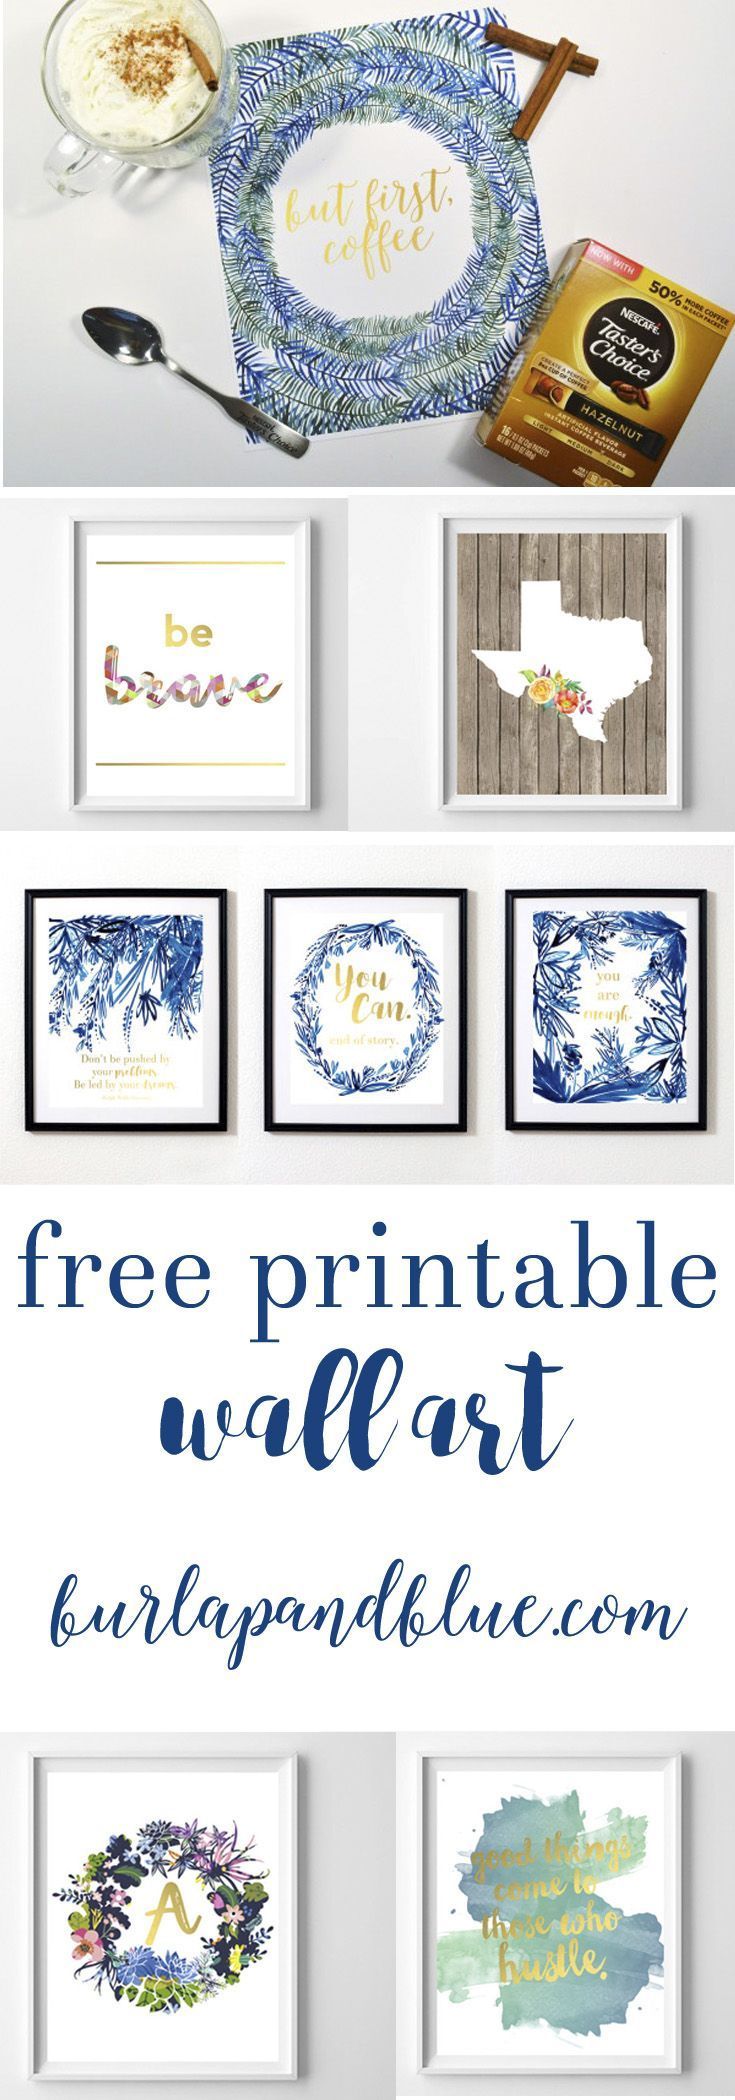 Free printable wall art! Over 50+ designs/styles. Printables perfect for nursery art, kids room decor, home decor, and gifts.